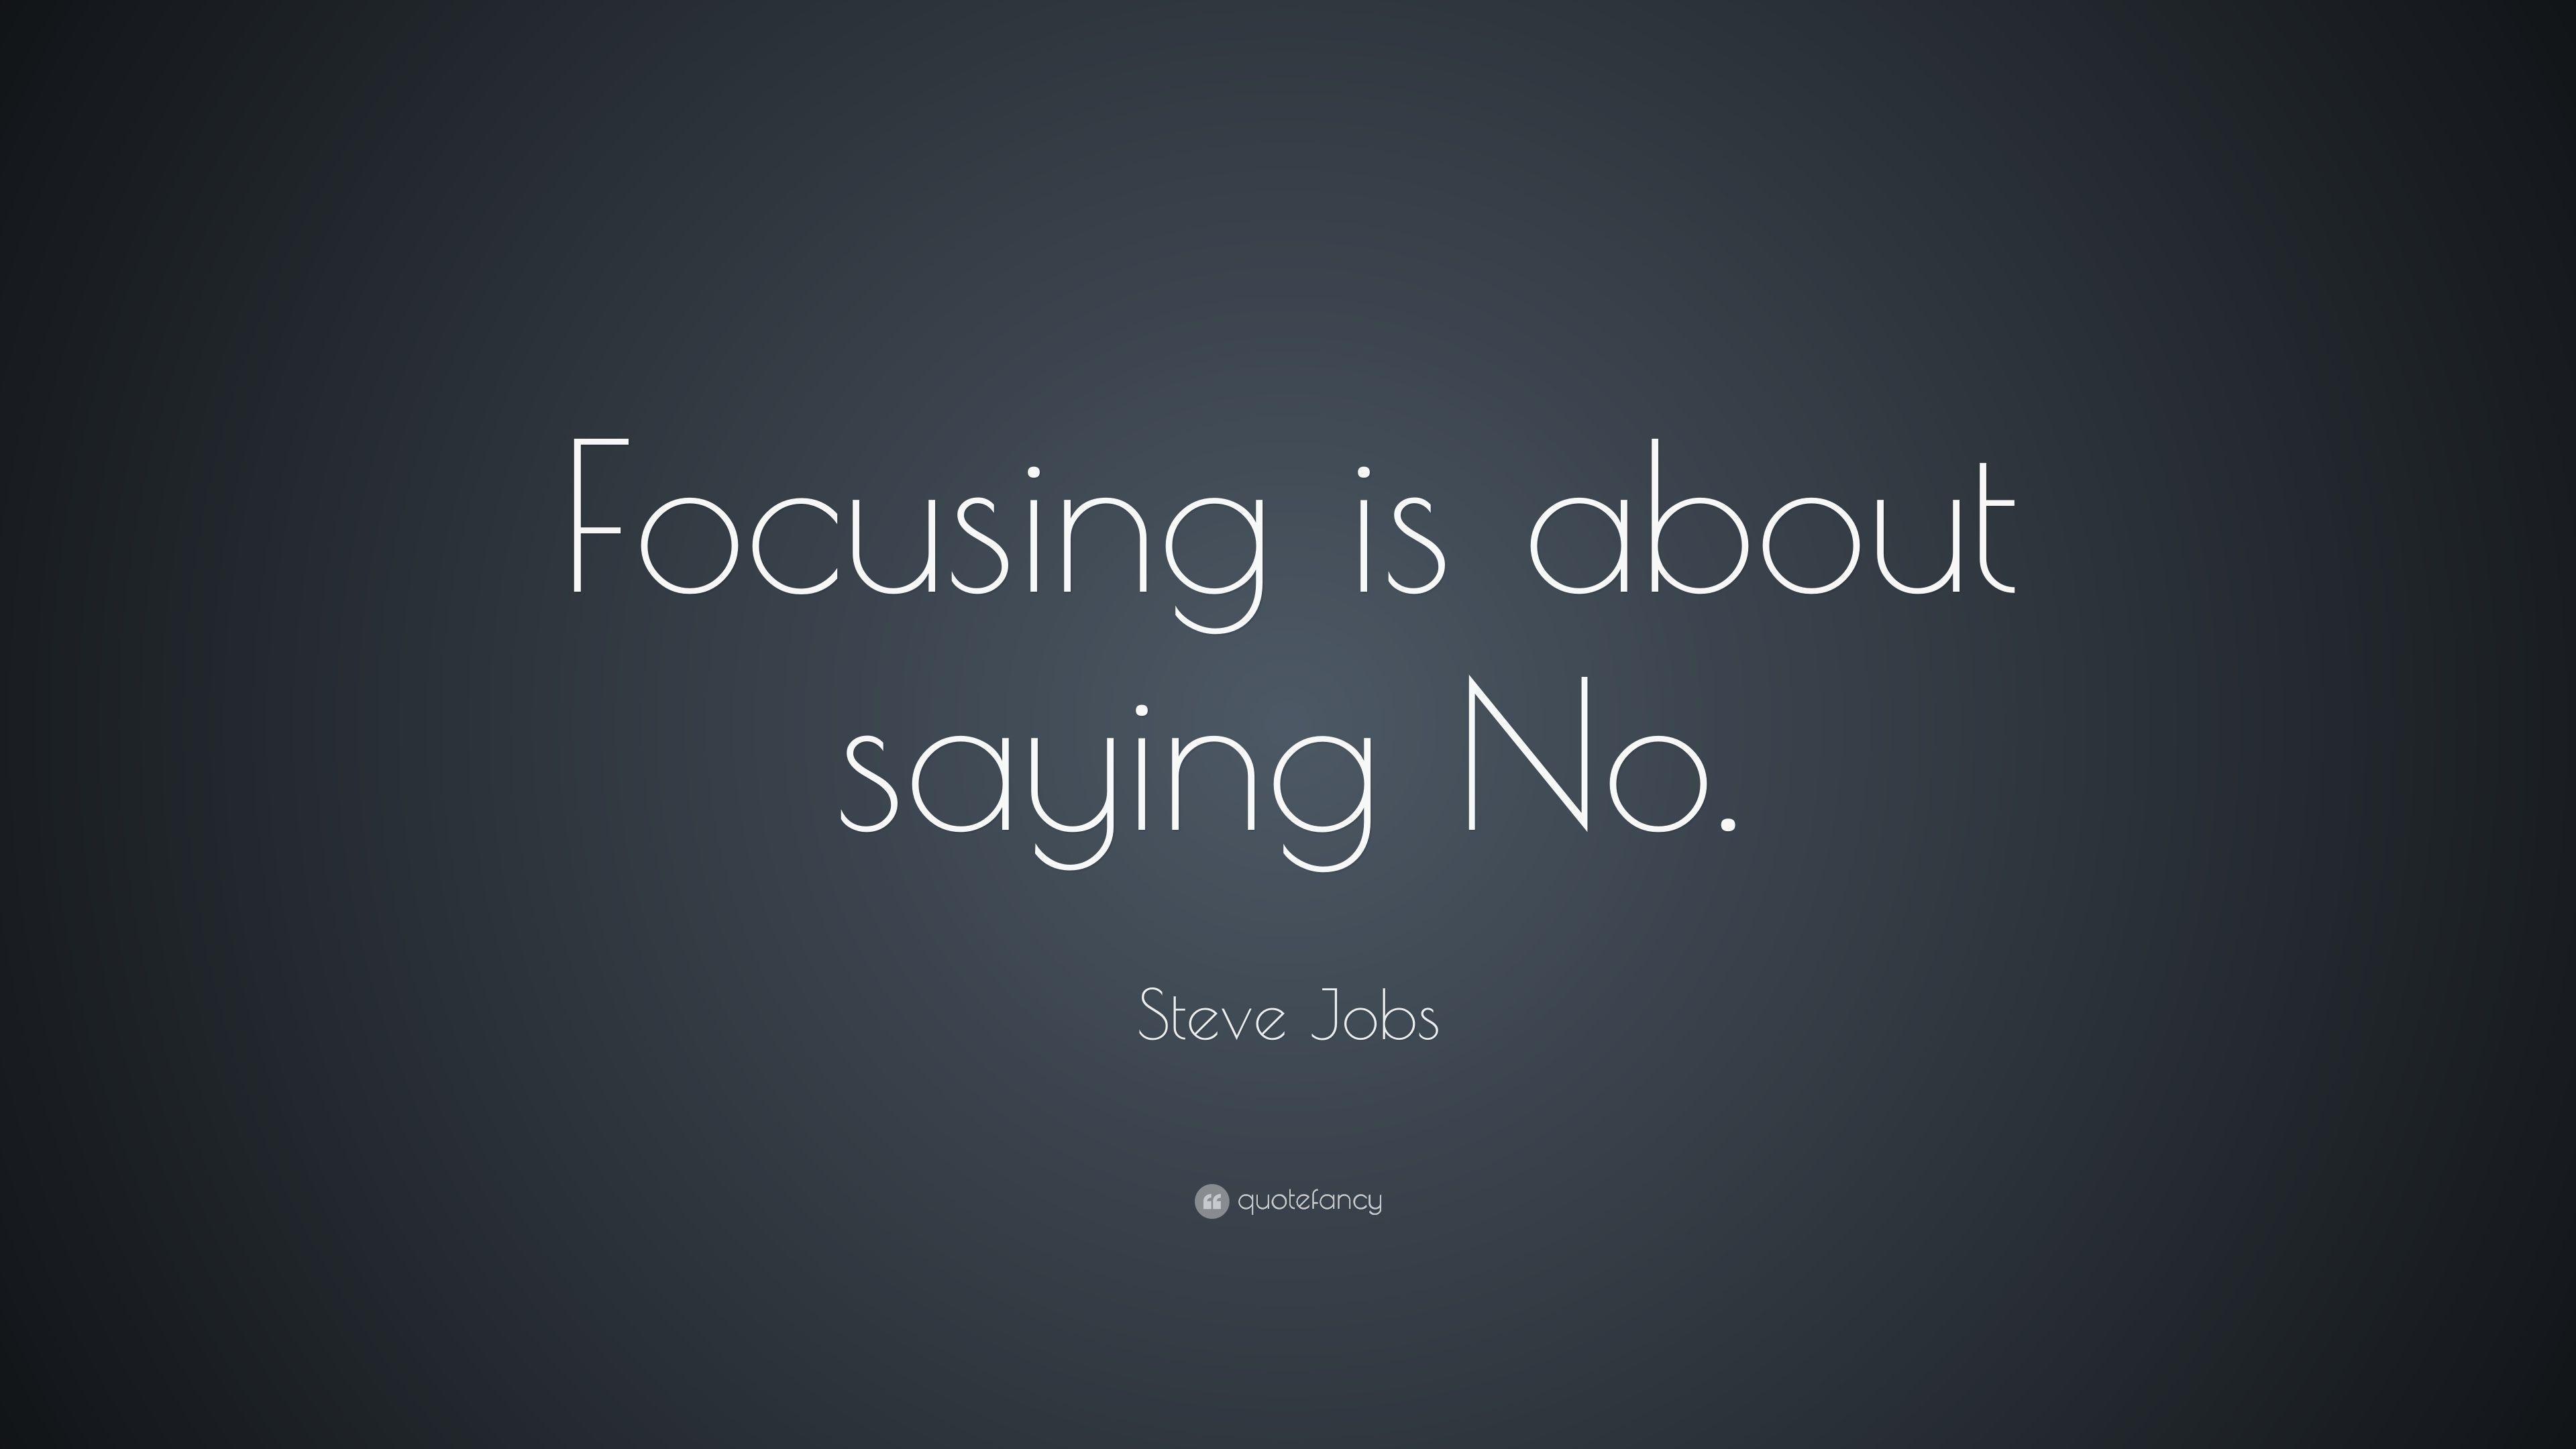 Steve Jobs Quote: “Focusing is about saying No.” 20 wallpaper